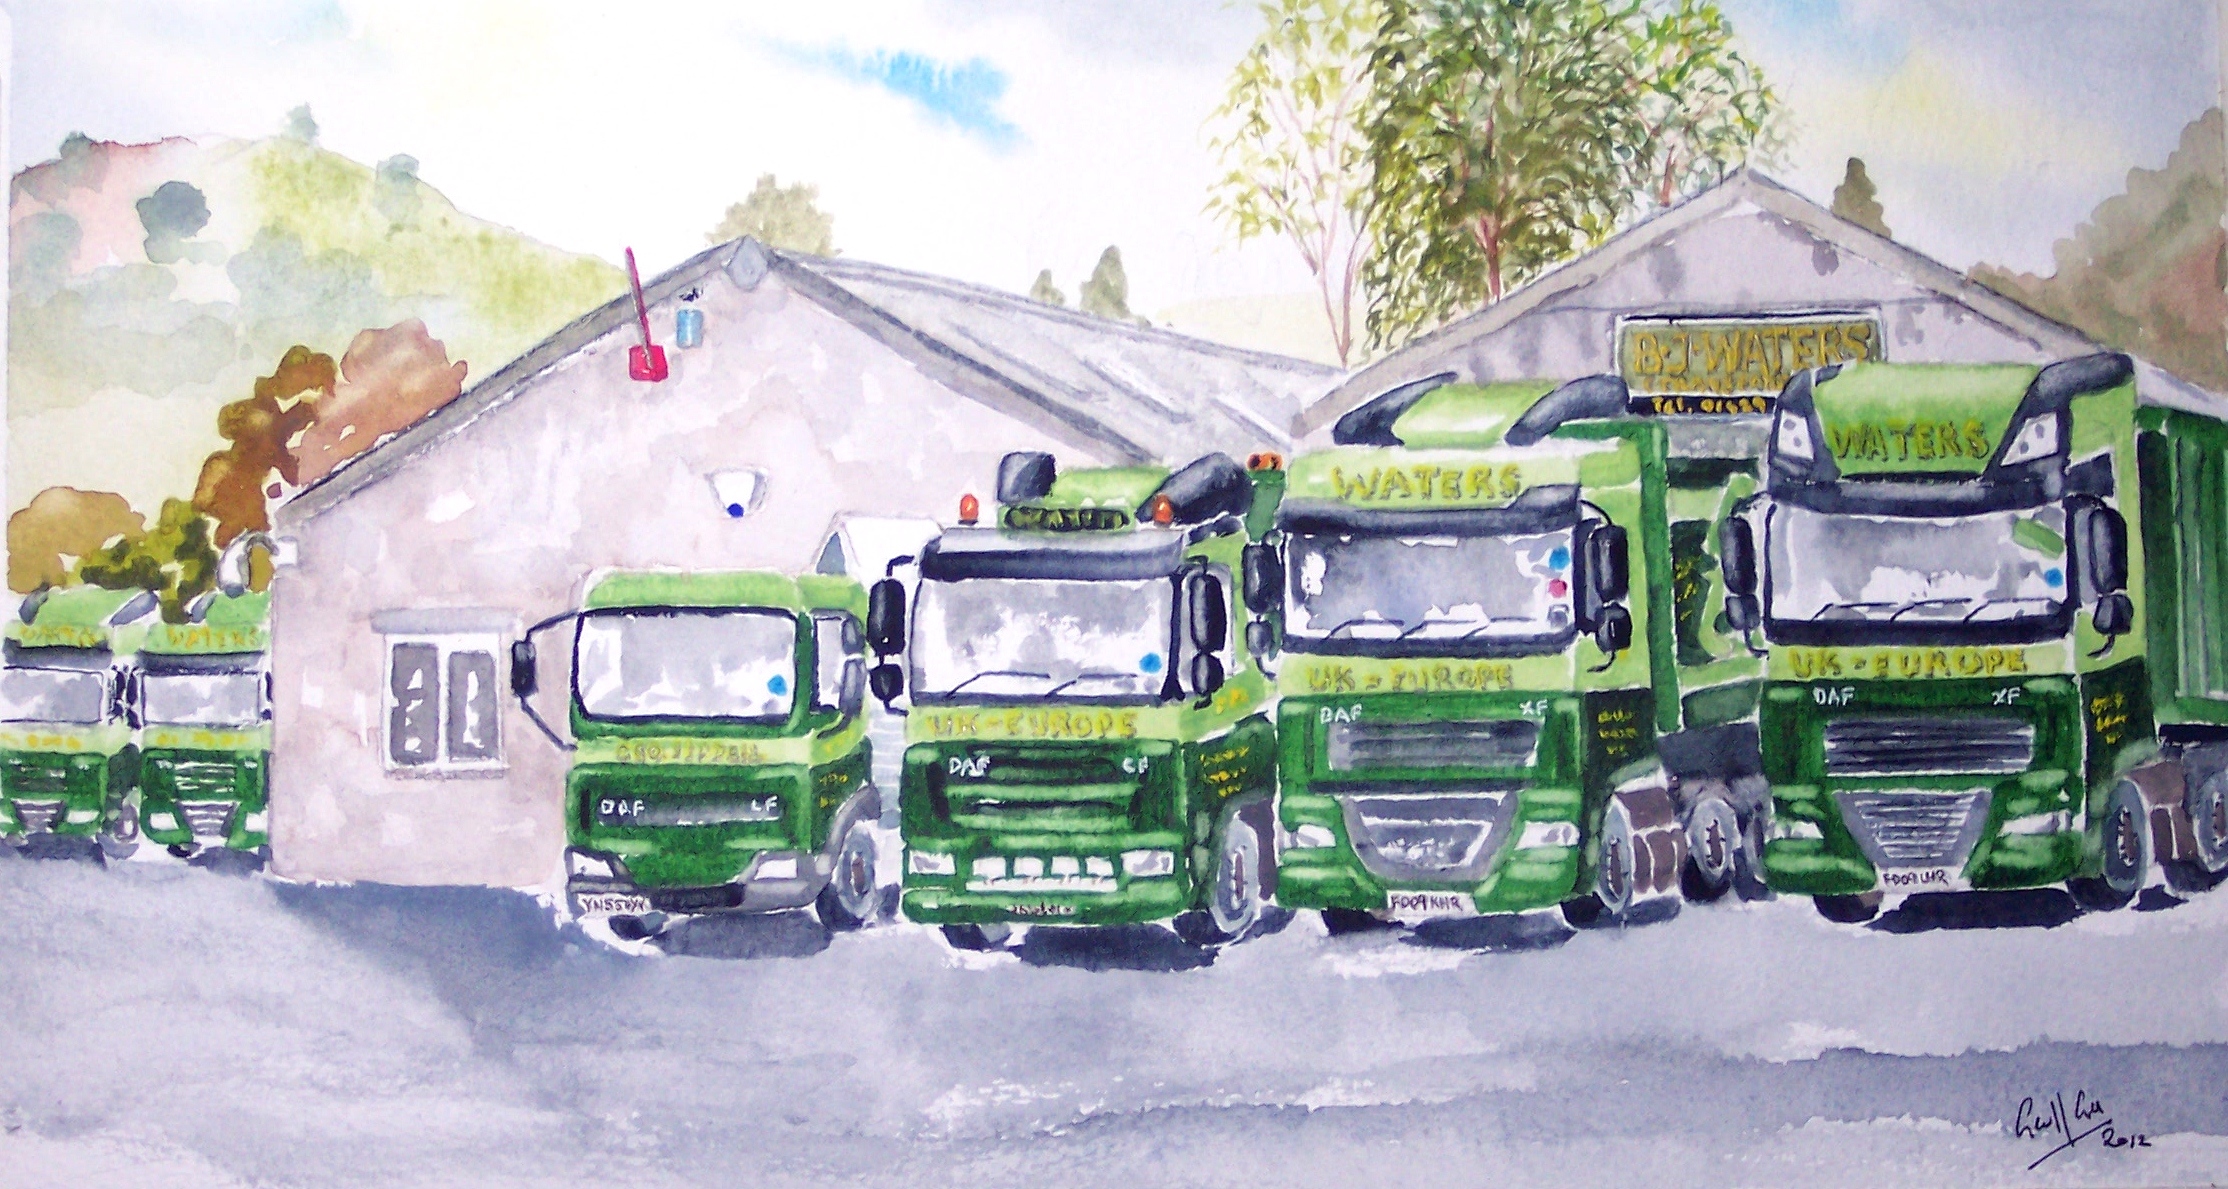 Bank Holiday Weekend - Waters Transport (120 + 121) Pair of watercolours Framed 24"x14" £150 each